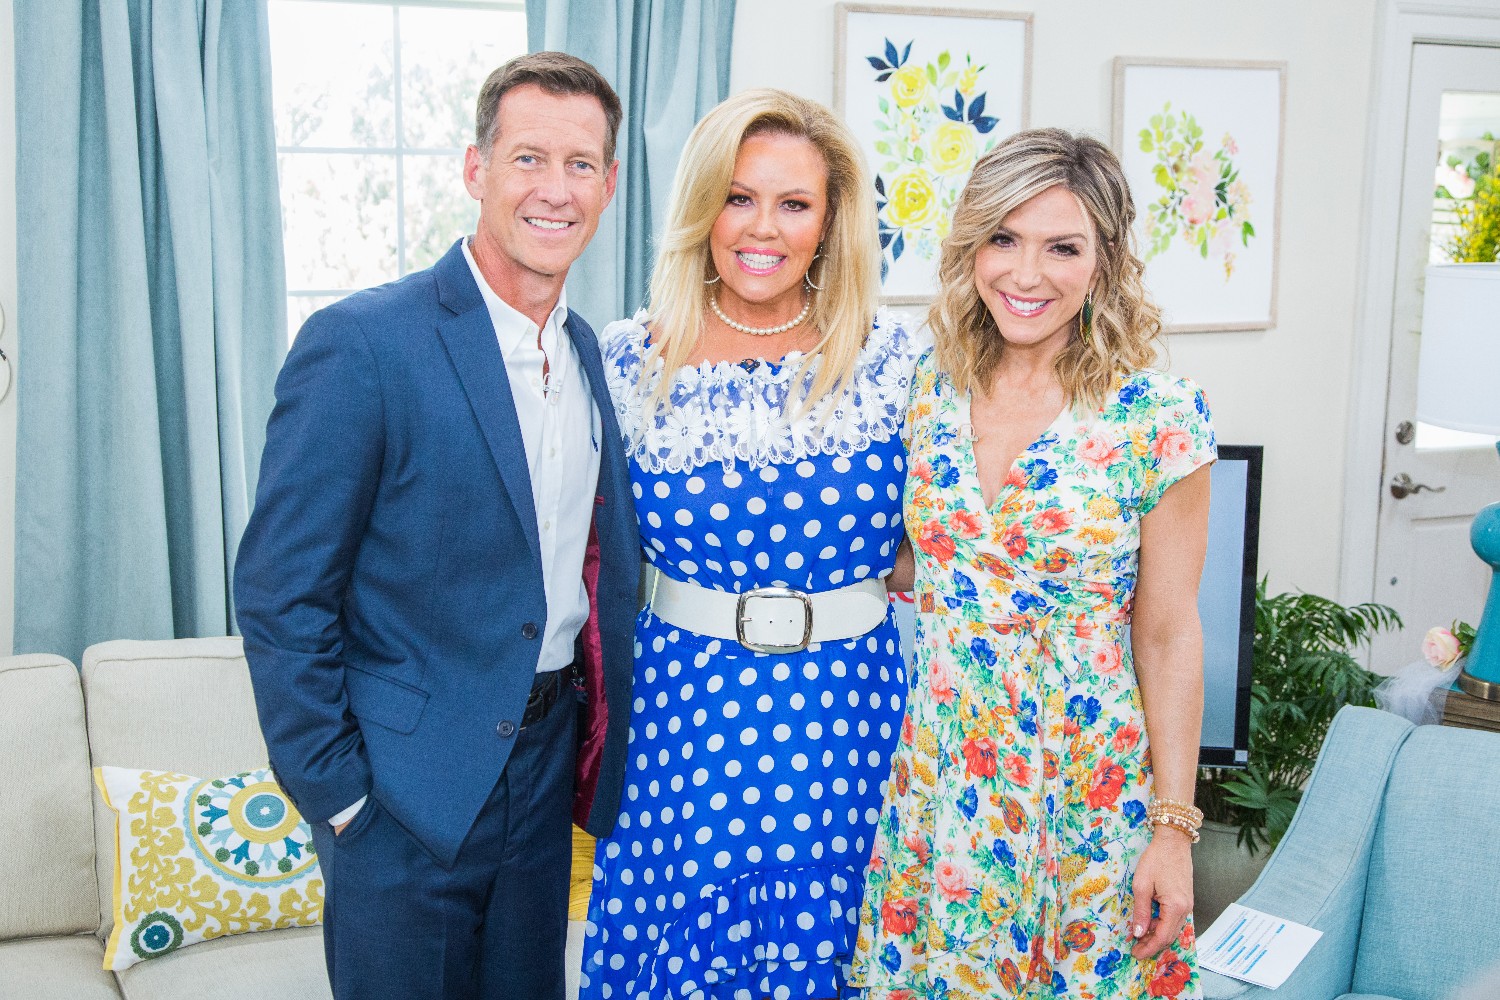 James Denton, Mary Murphy, and Debbie Matenopoulos